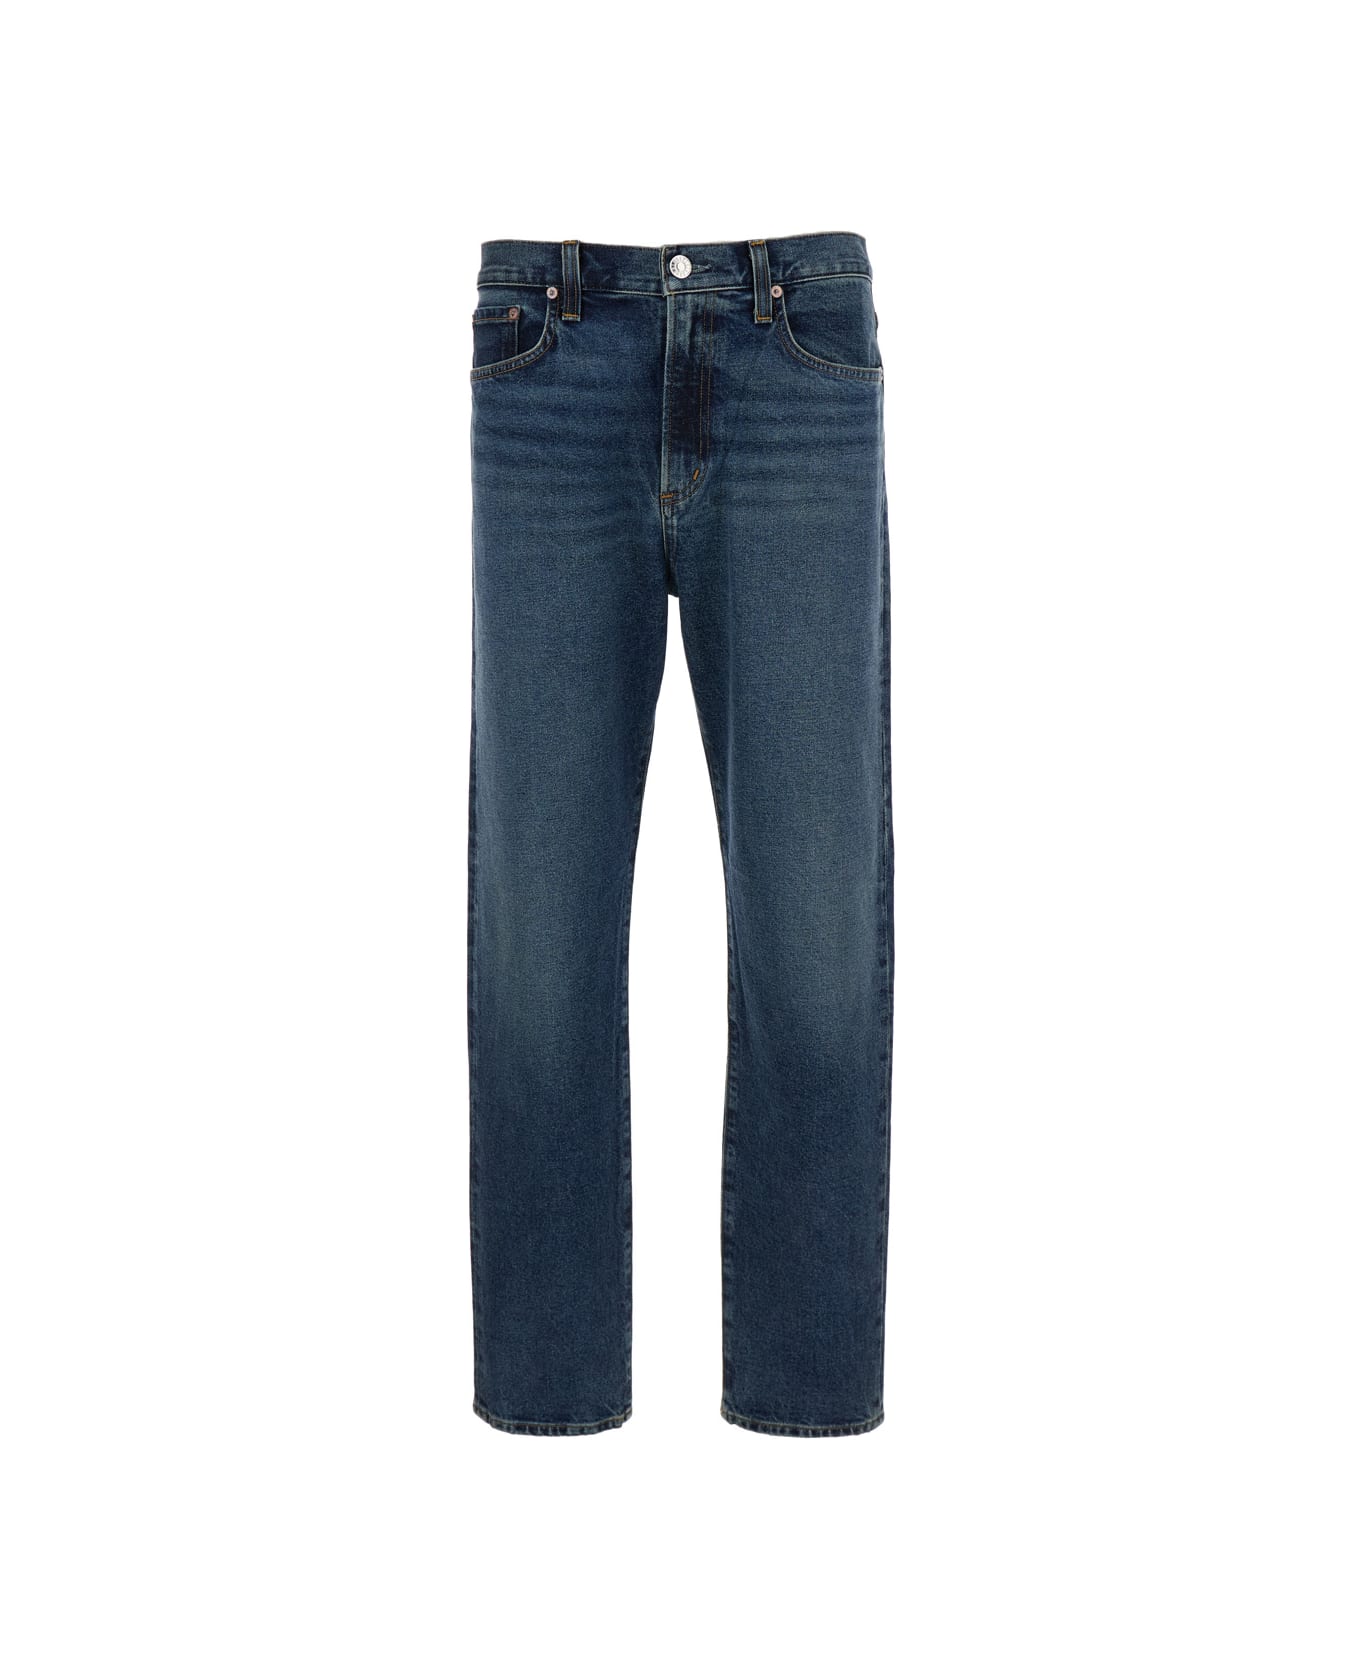 AGOLDE Blue Straight Jeans With Branded Button In Cotton Blend Denim Man - Blu